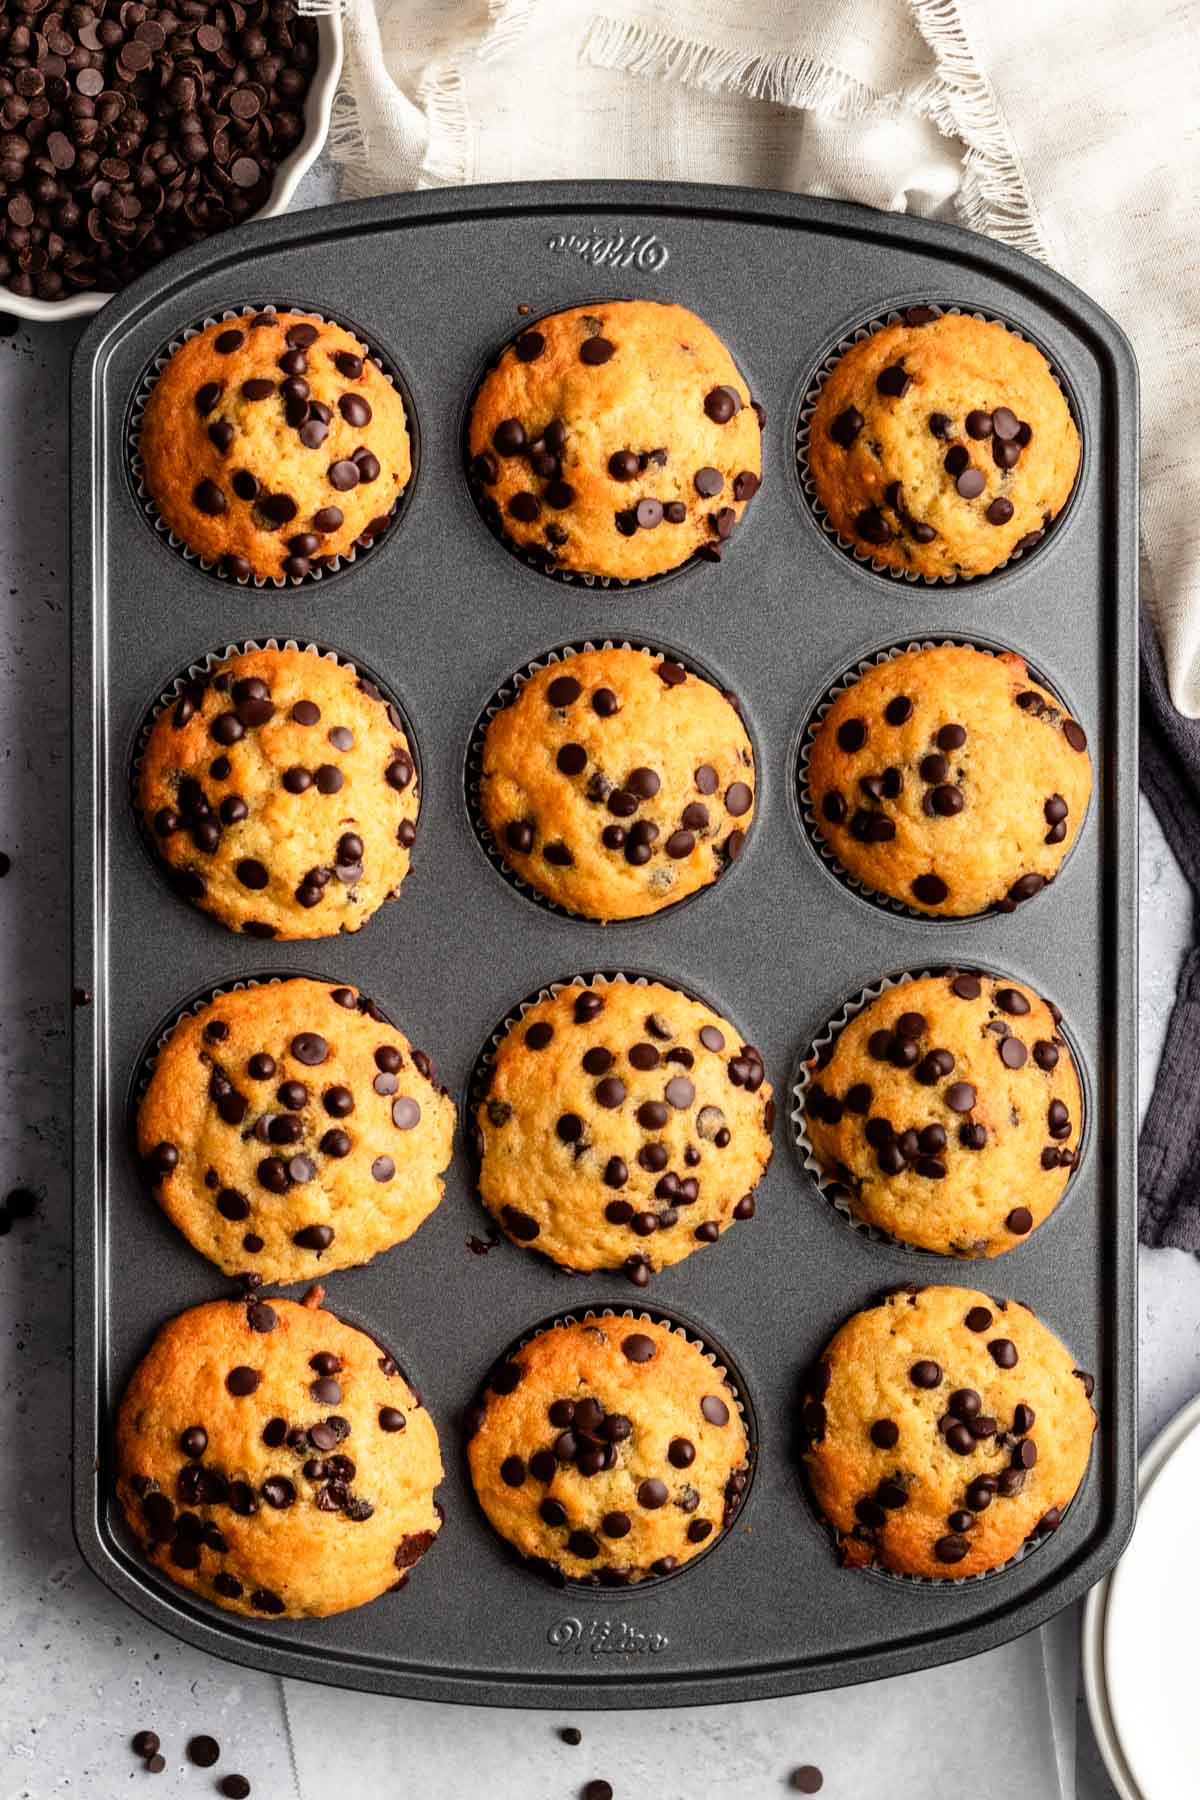 Top of chocolate chip muffins in a baking pan.